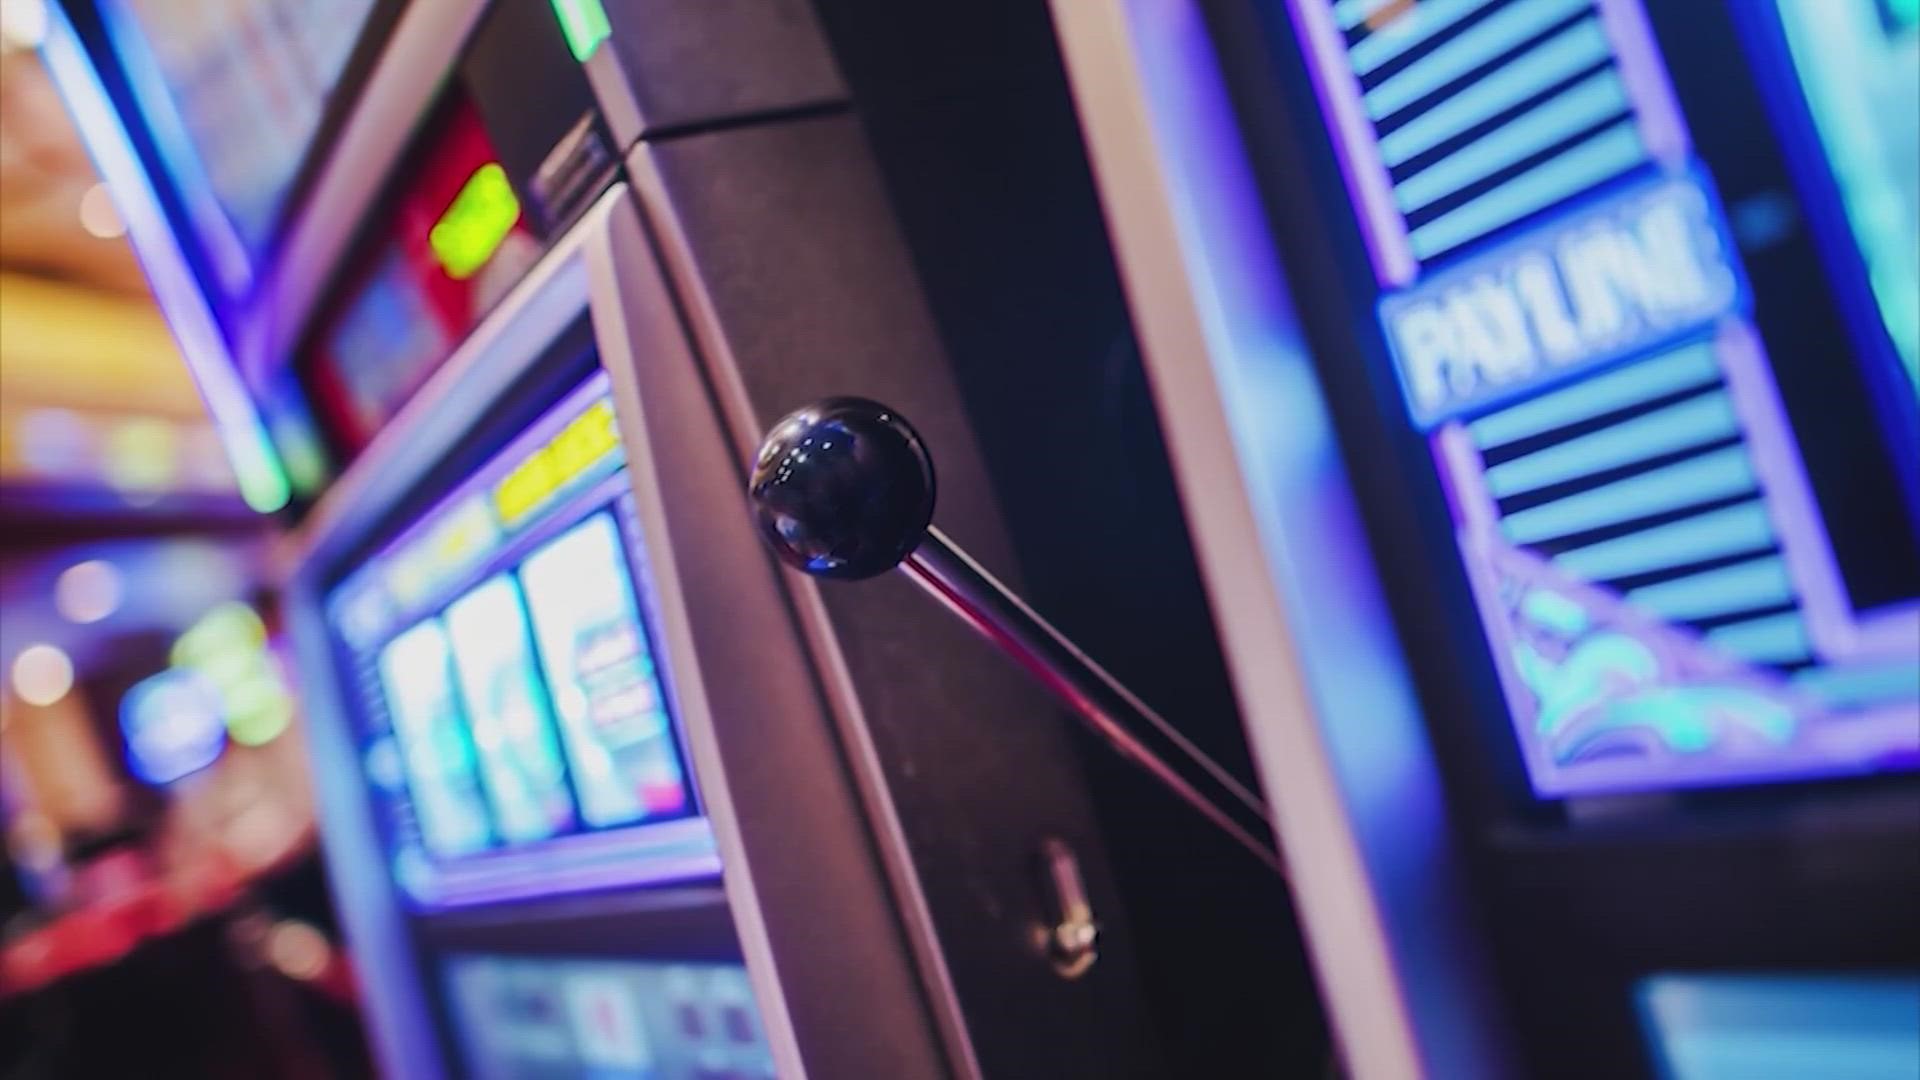 For the first time, Gov. Abbott and House Speaker Phelan are opening the door wider than ever for casino gambling and online sports betting legislation.